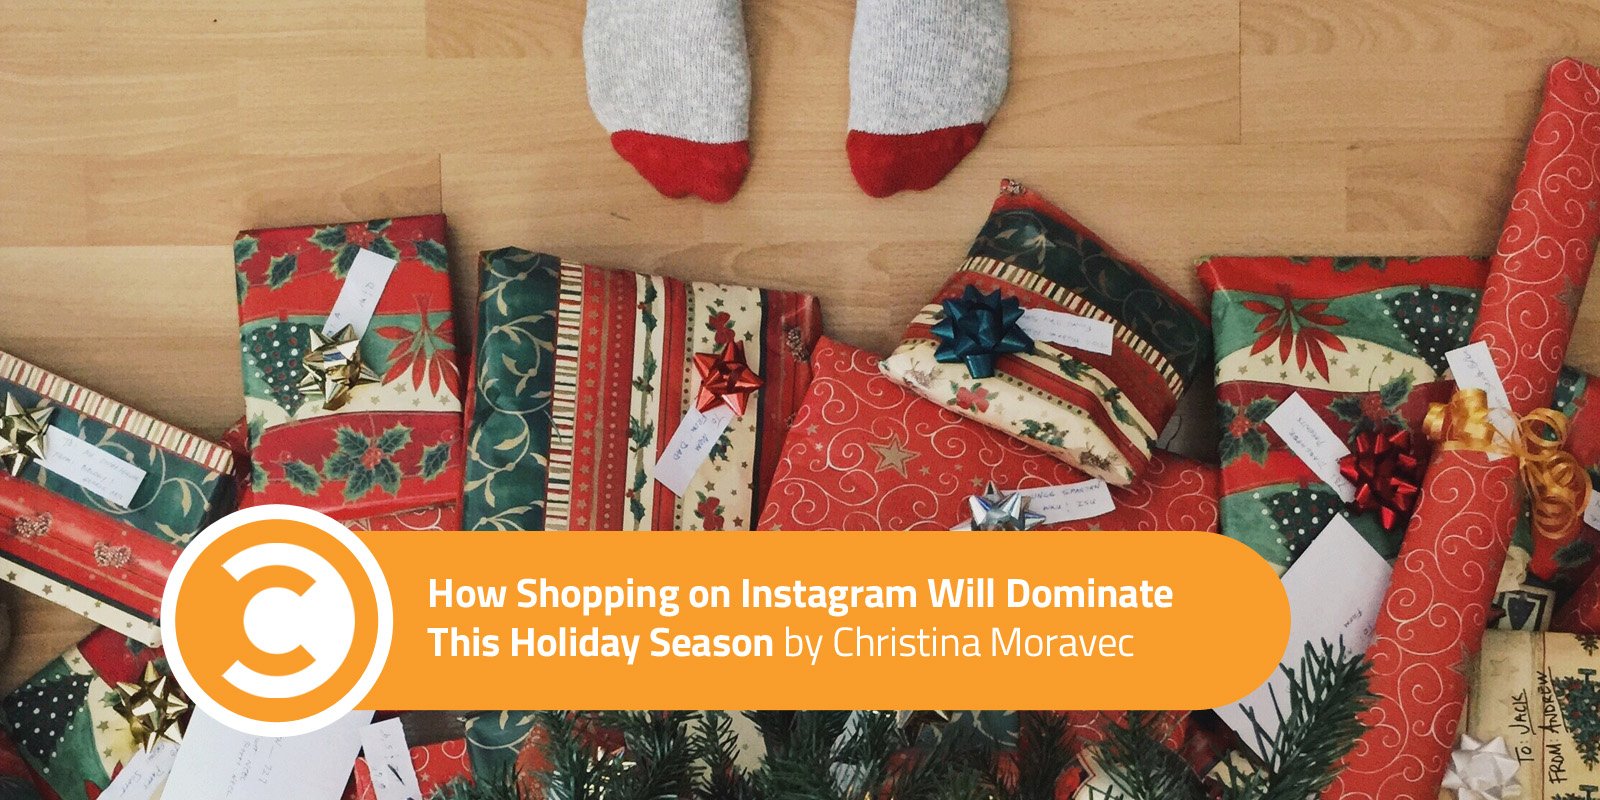 How Shopping on Instagram Will Dominate This Holiday Season